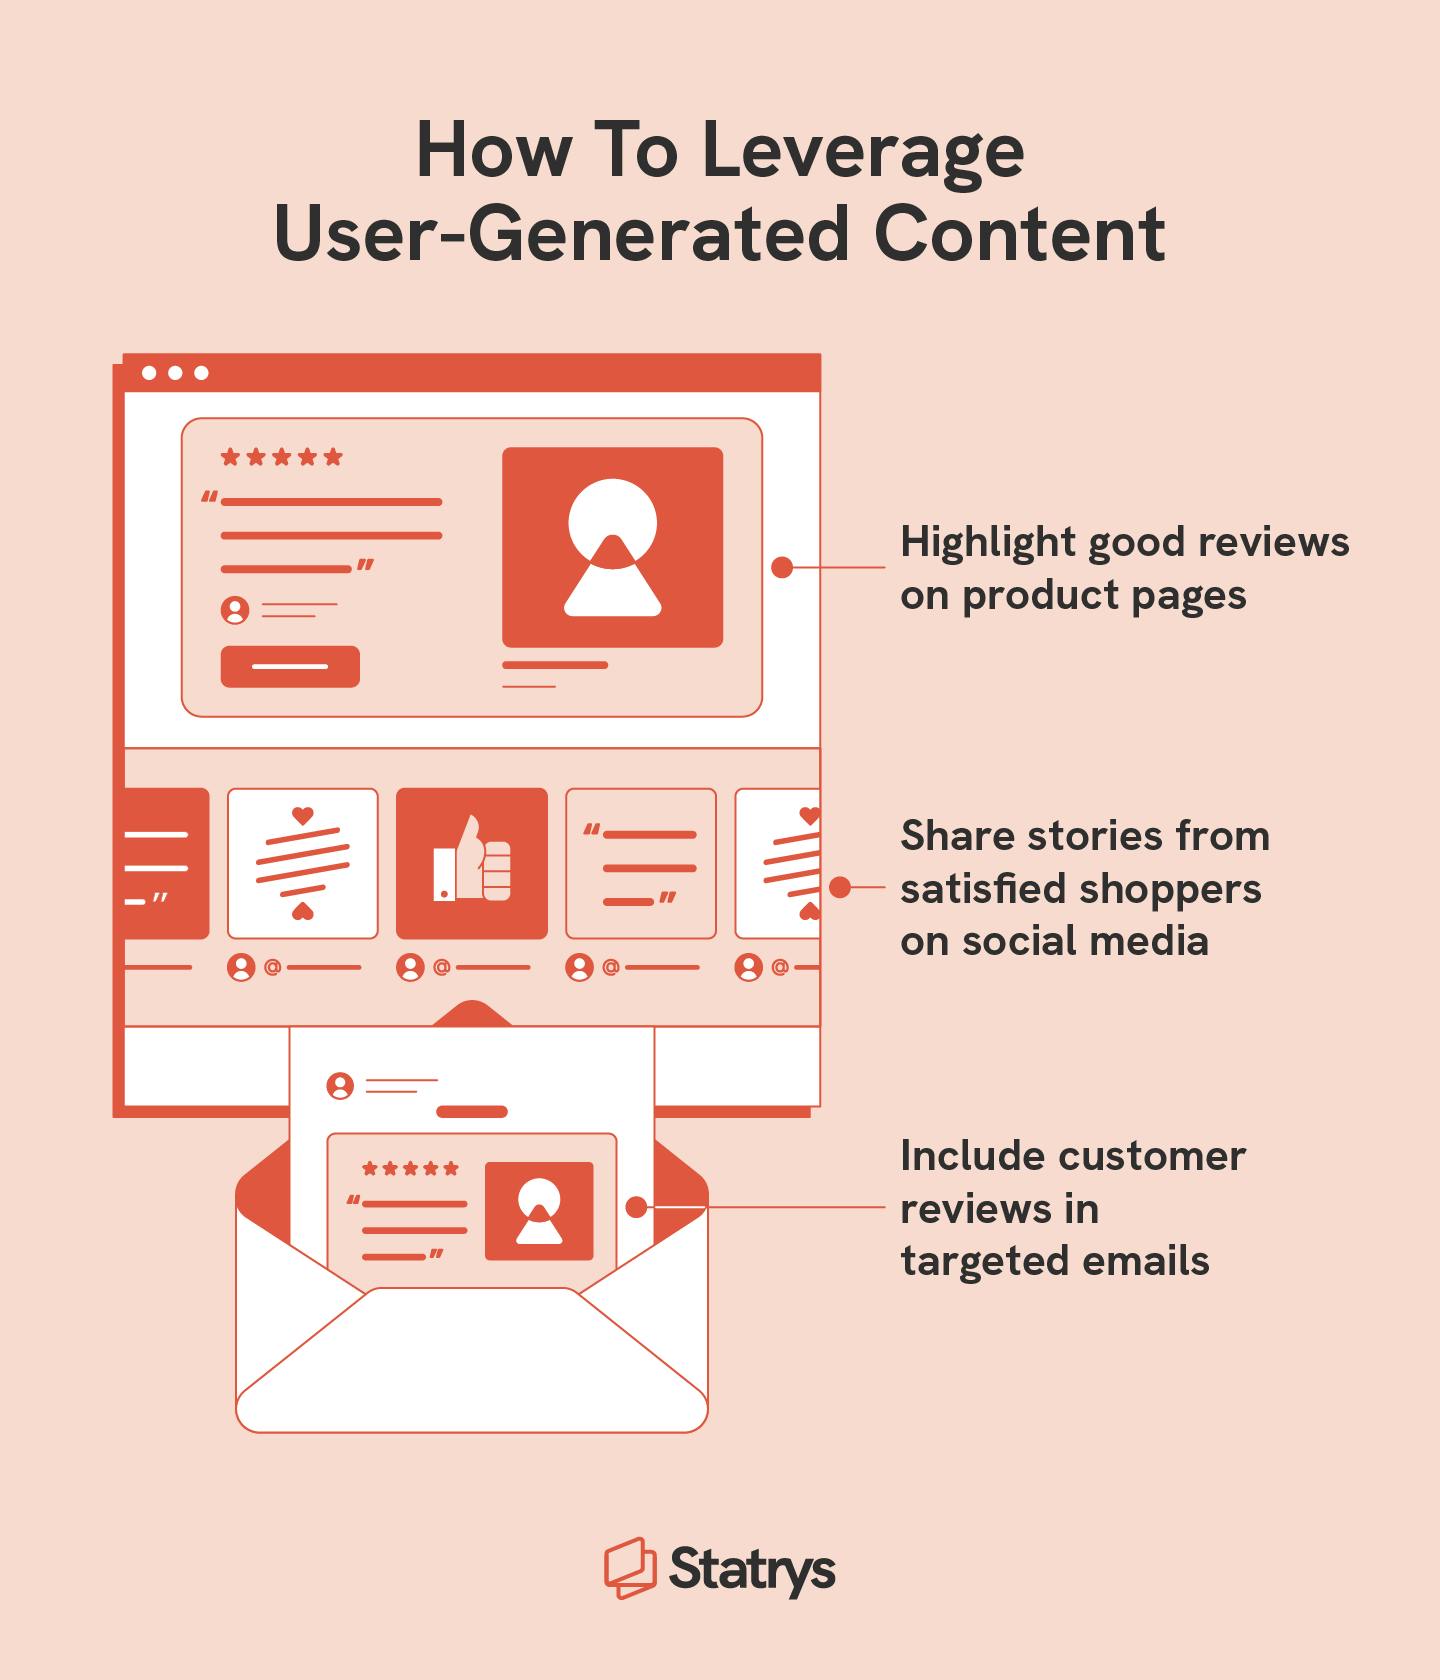 An illustrated chart showing how to use user-generated content in a way that helps you learn how to grow an ecommerce business including using good reviews, stories from shoppers, and reviews in emails.